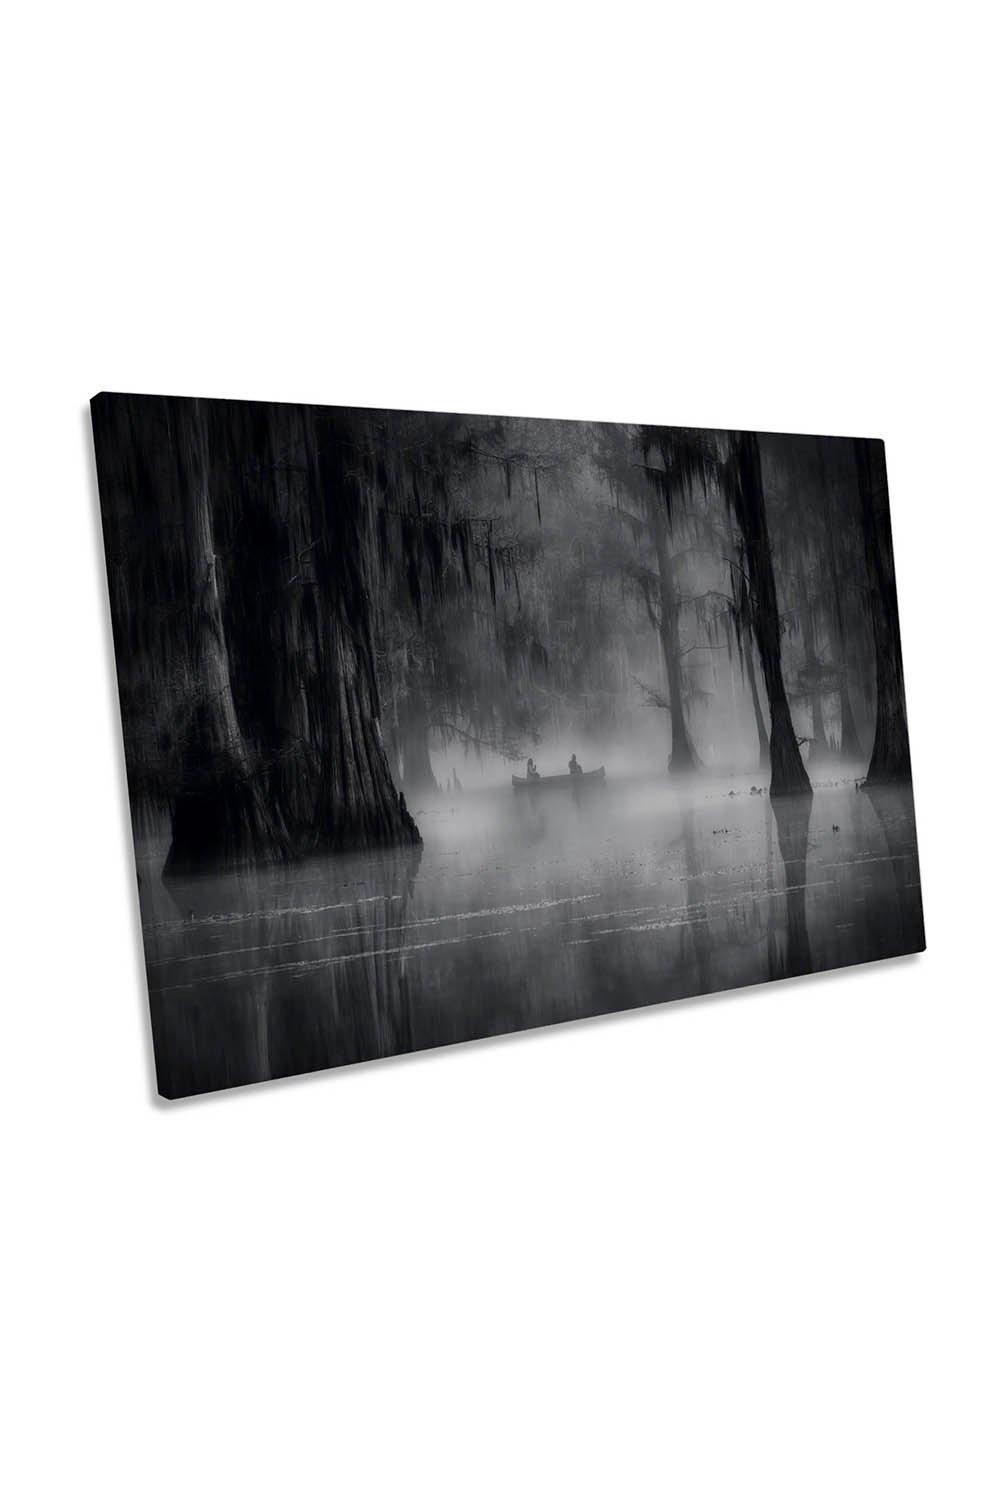 Misty Morning Swamp Land Forest Boat Canvas Wall Art Picture Print